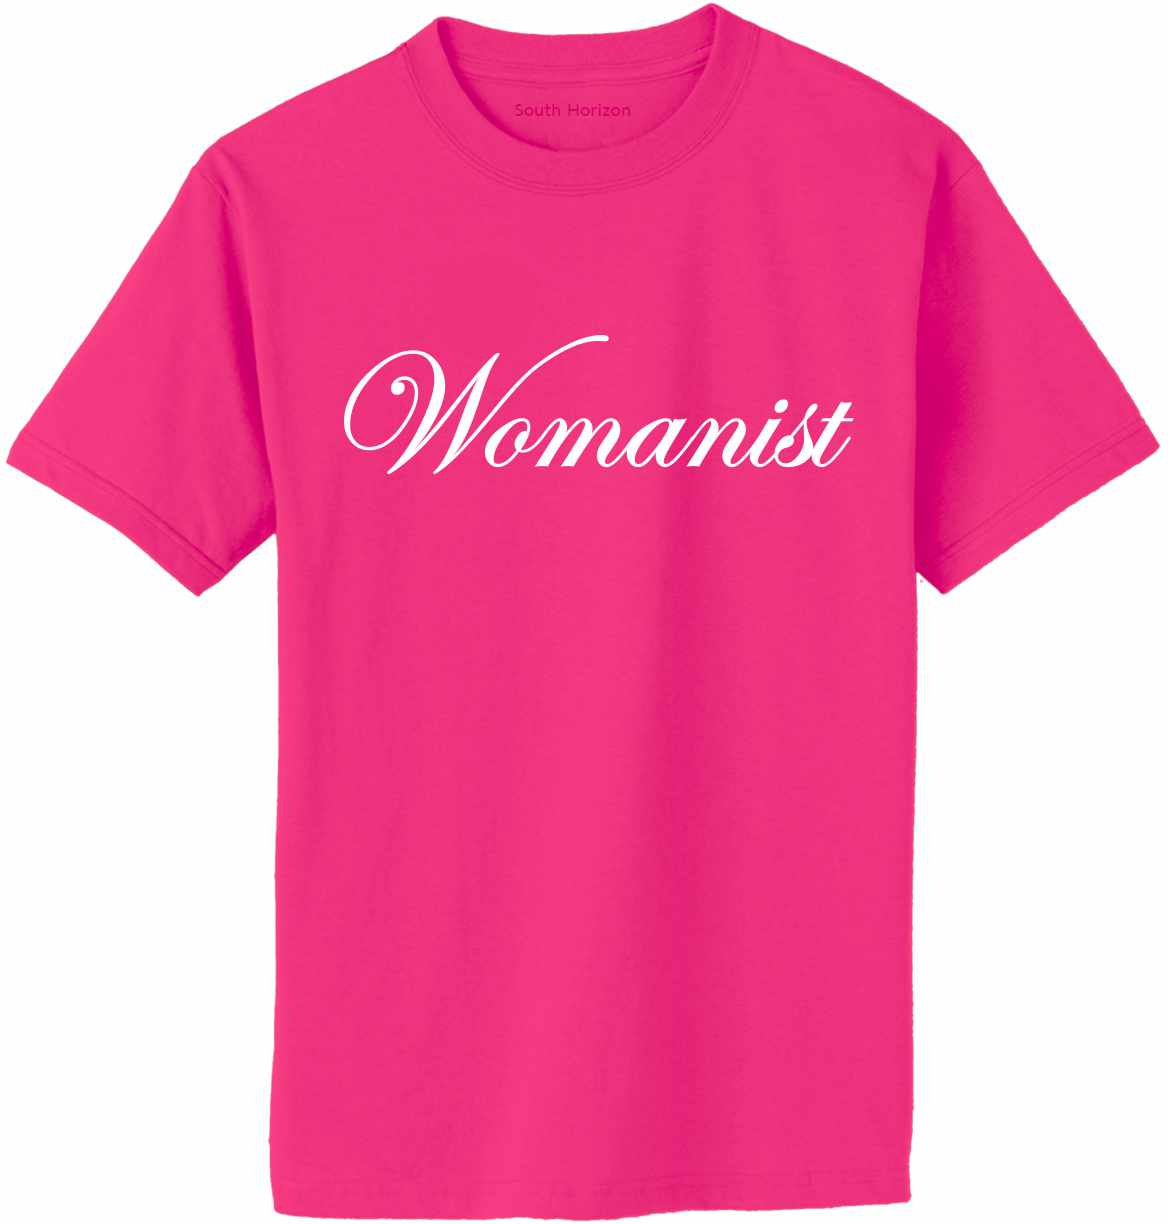 Womanist on Adult T-Shirt